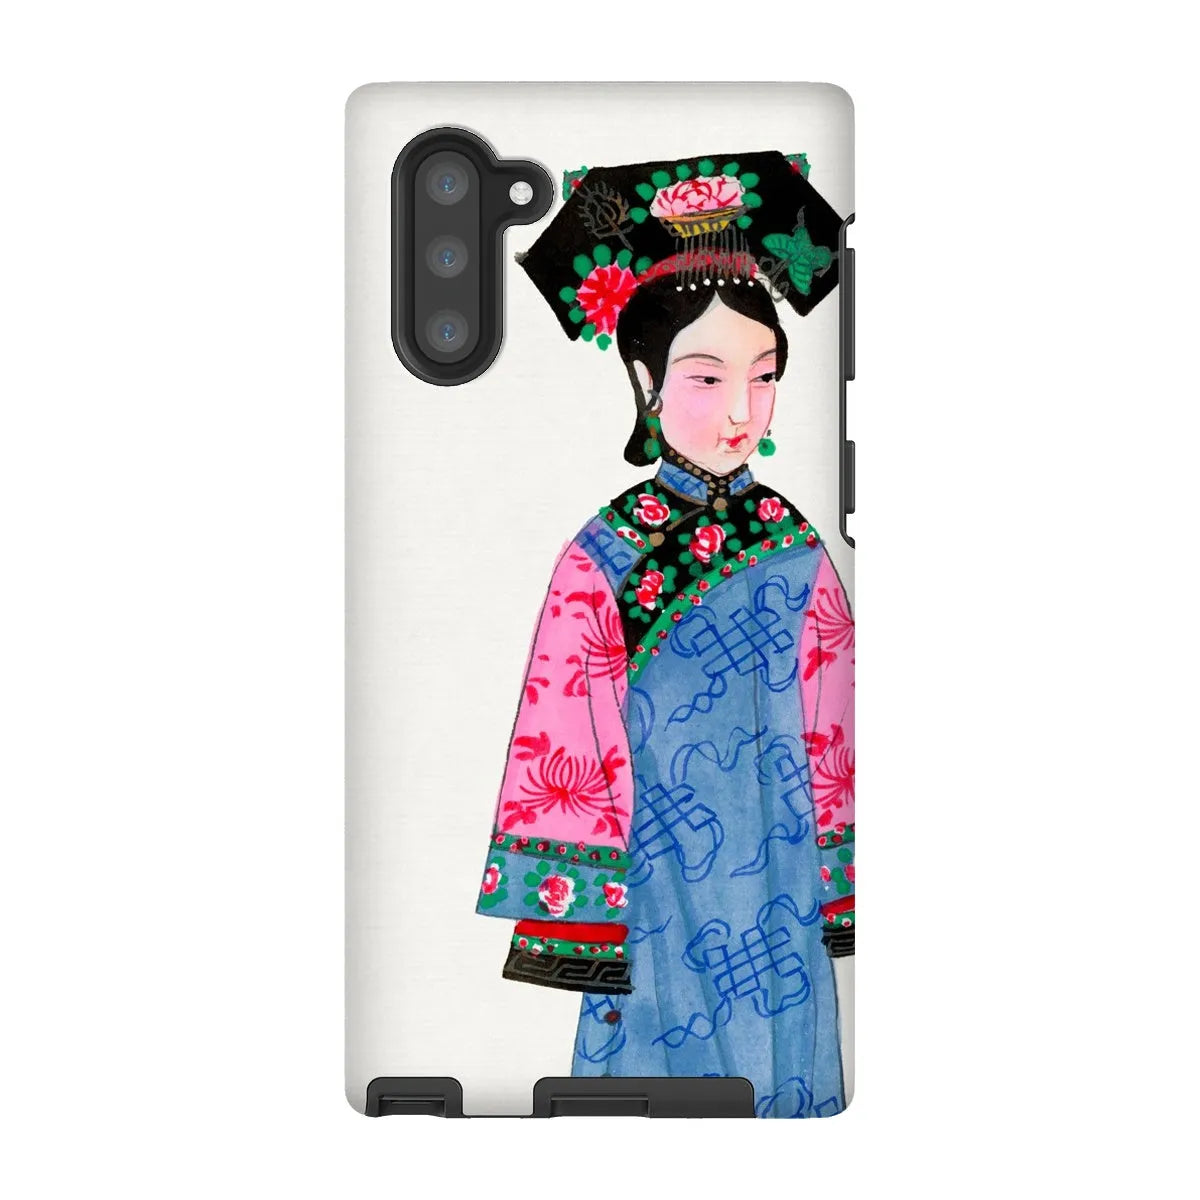 Noblewoman Too - Manchu Aesthetic Art Phone Case - Samsung Galaxy Note 10 / Matte - Mobile Phone Cases - Aesthetic Art